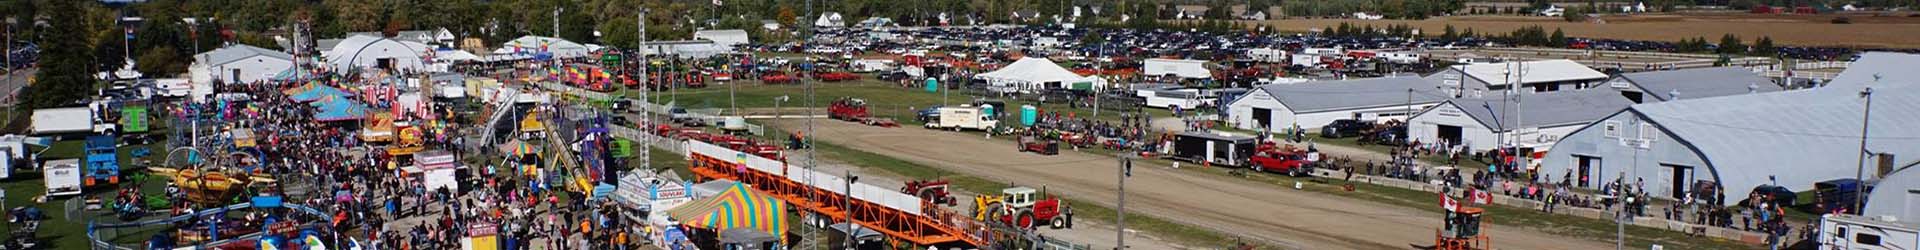 Ontario Vintage Tractor Pullers Association Thanksgiving 2021 Pull